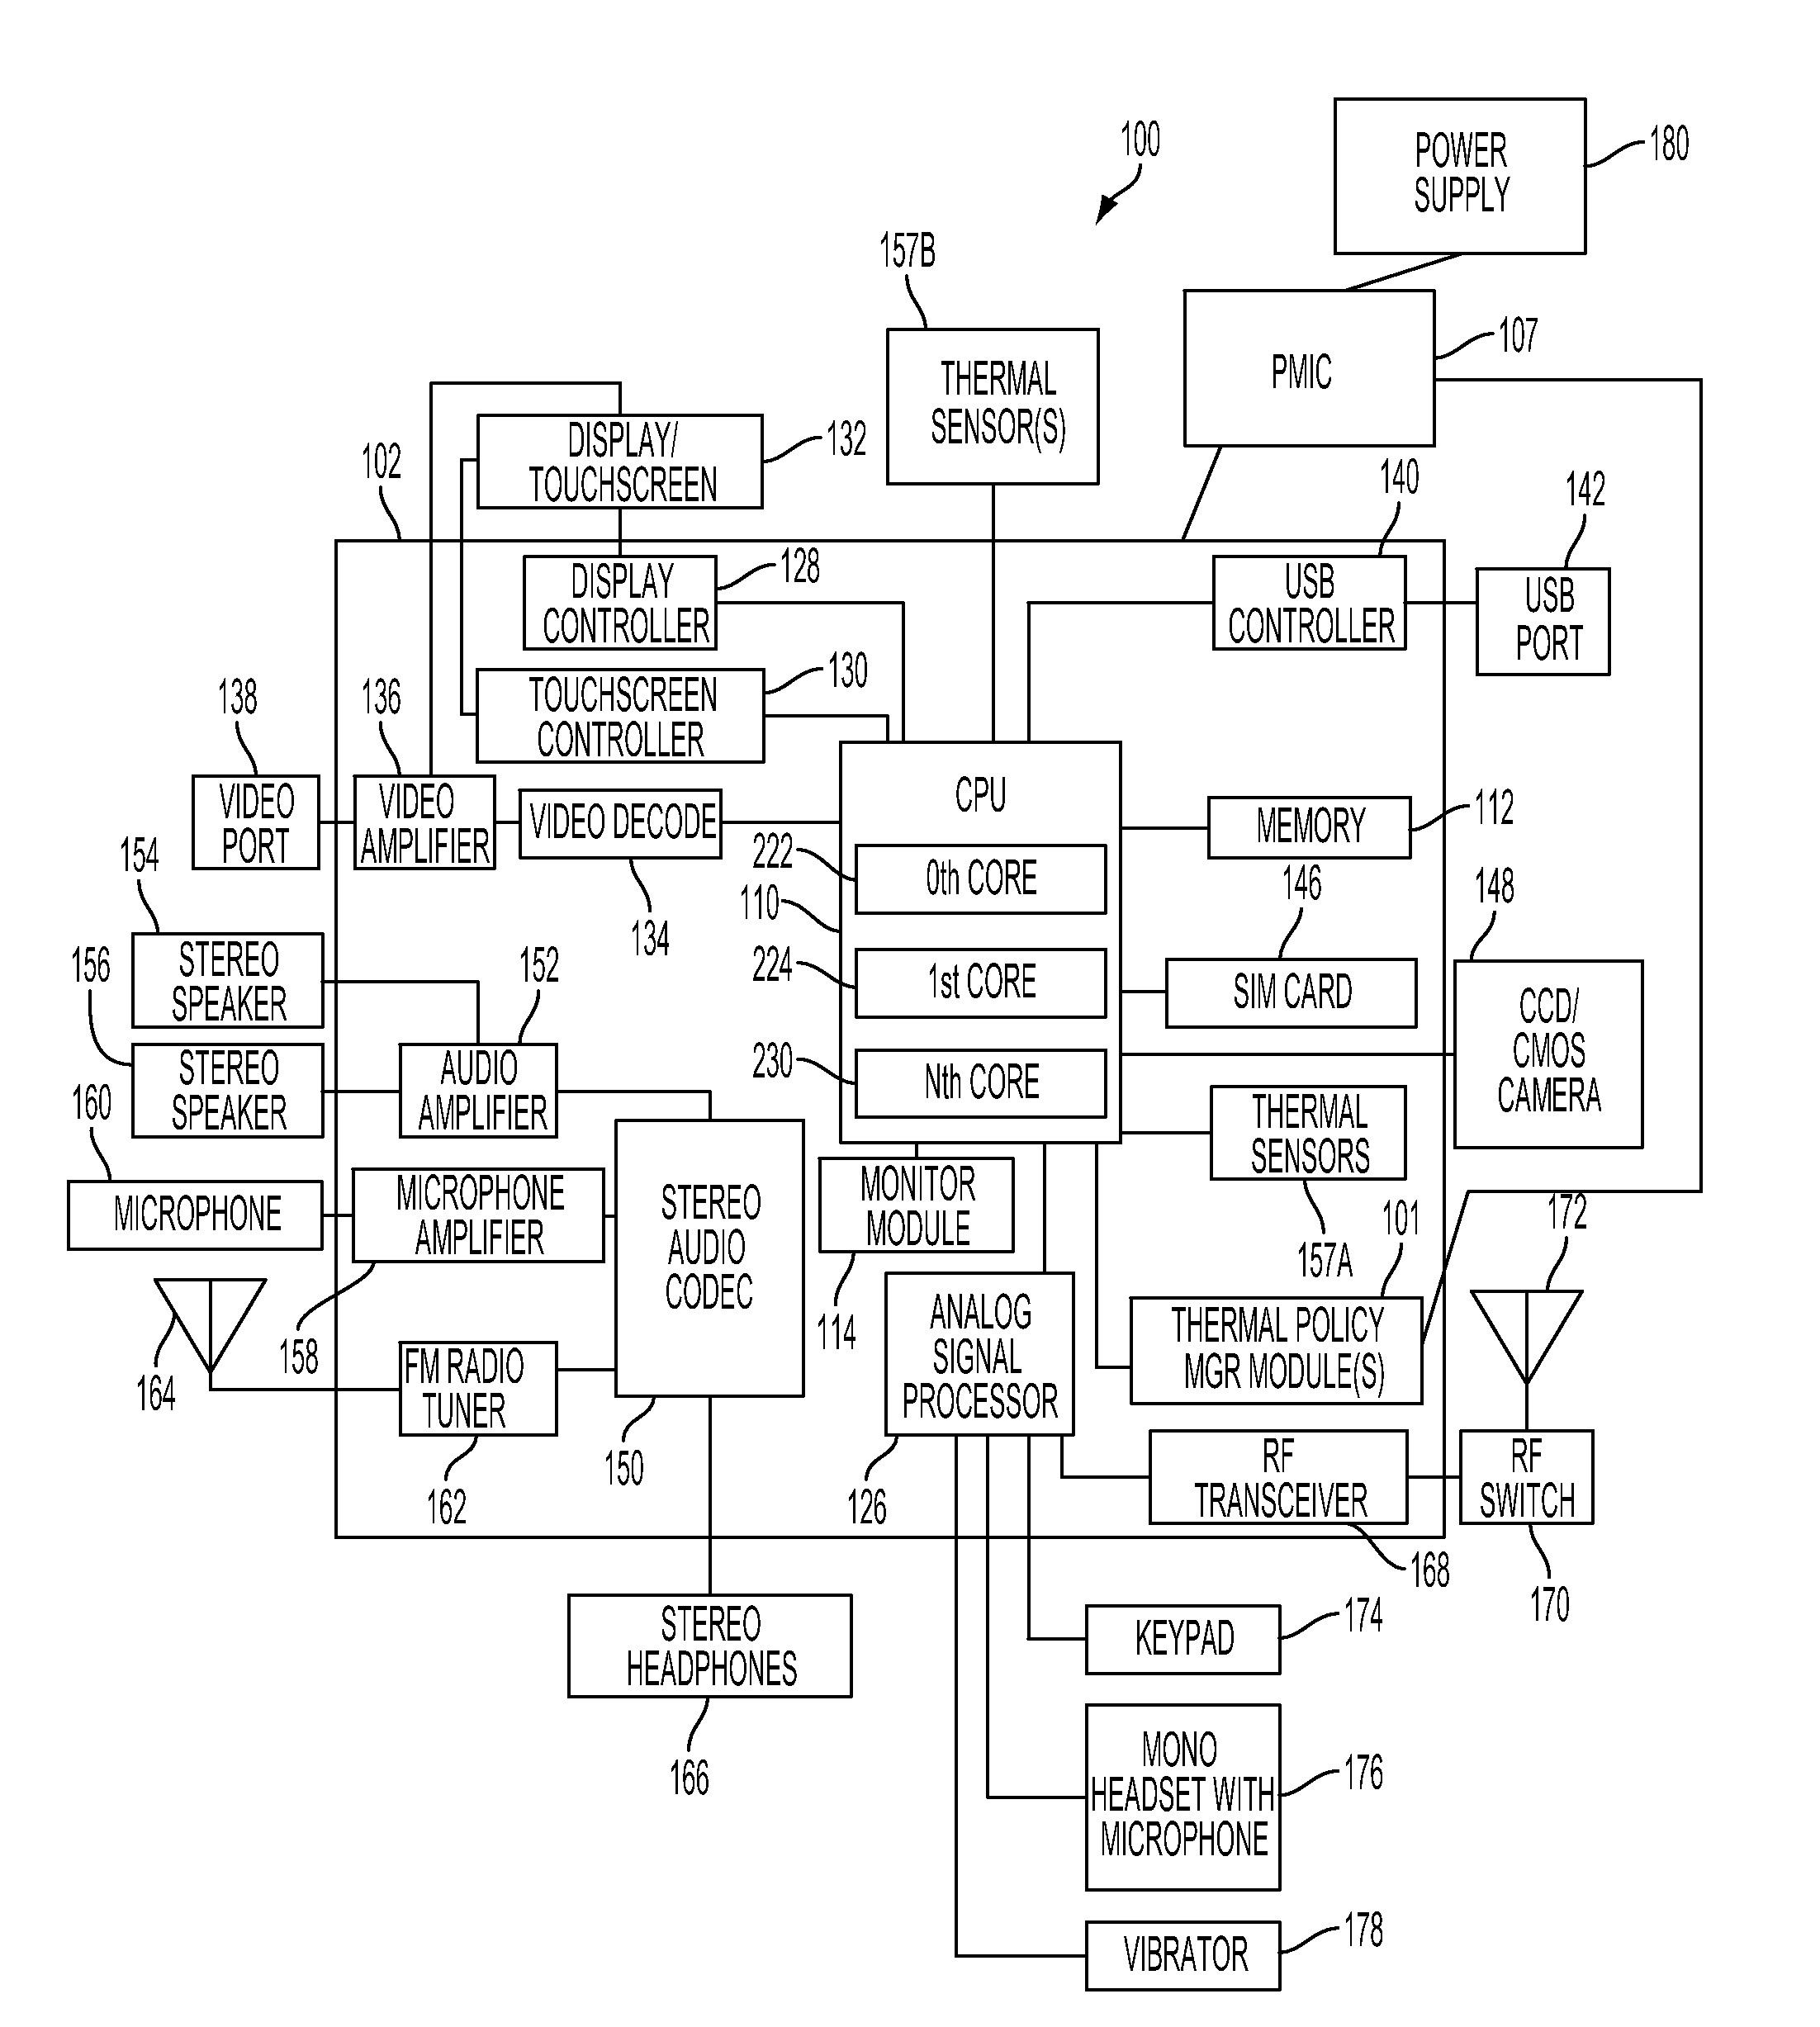 Method and system for reducing thermal load by monitoring and controlling current flow in a portable computing device